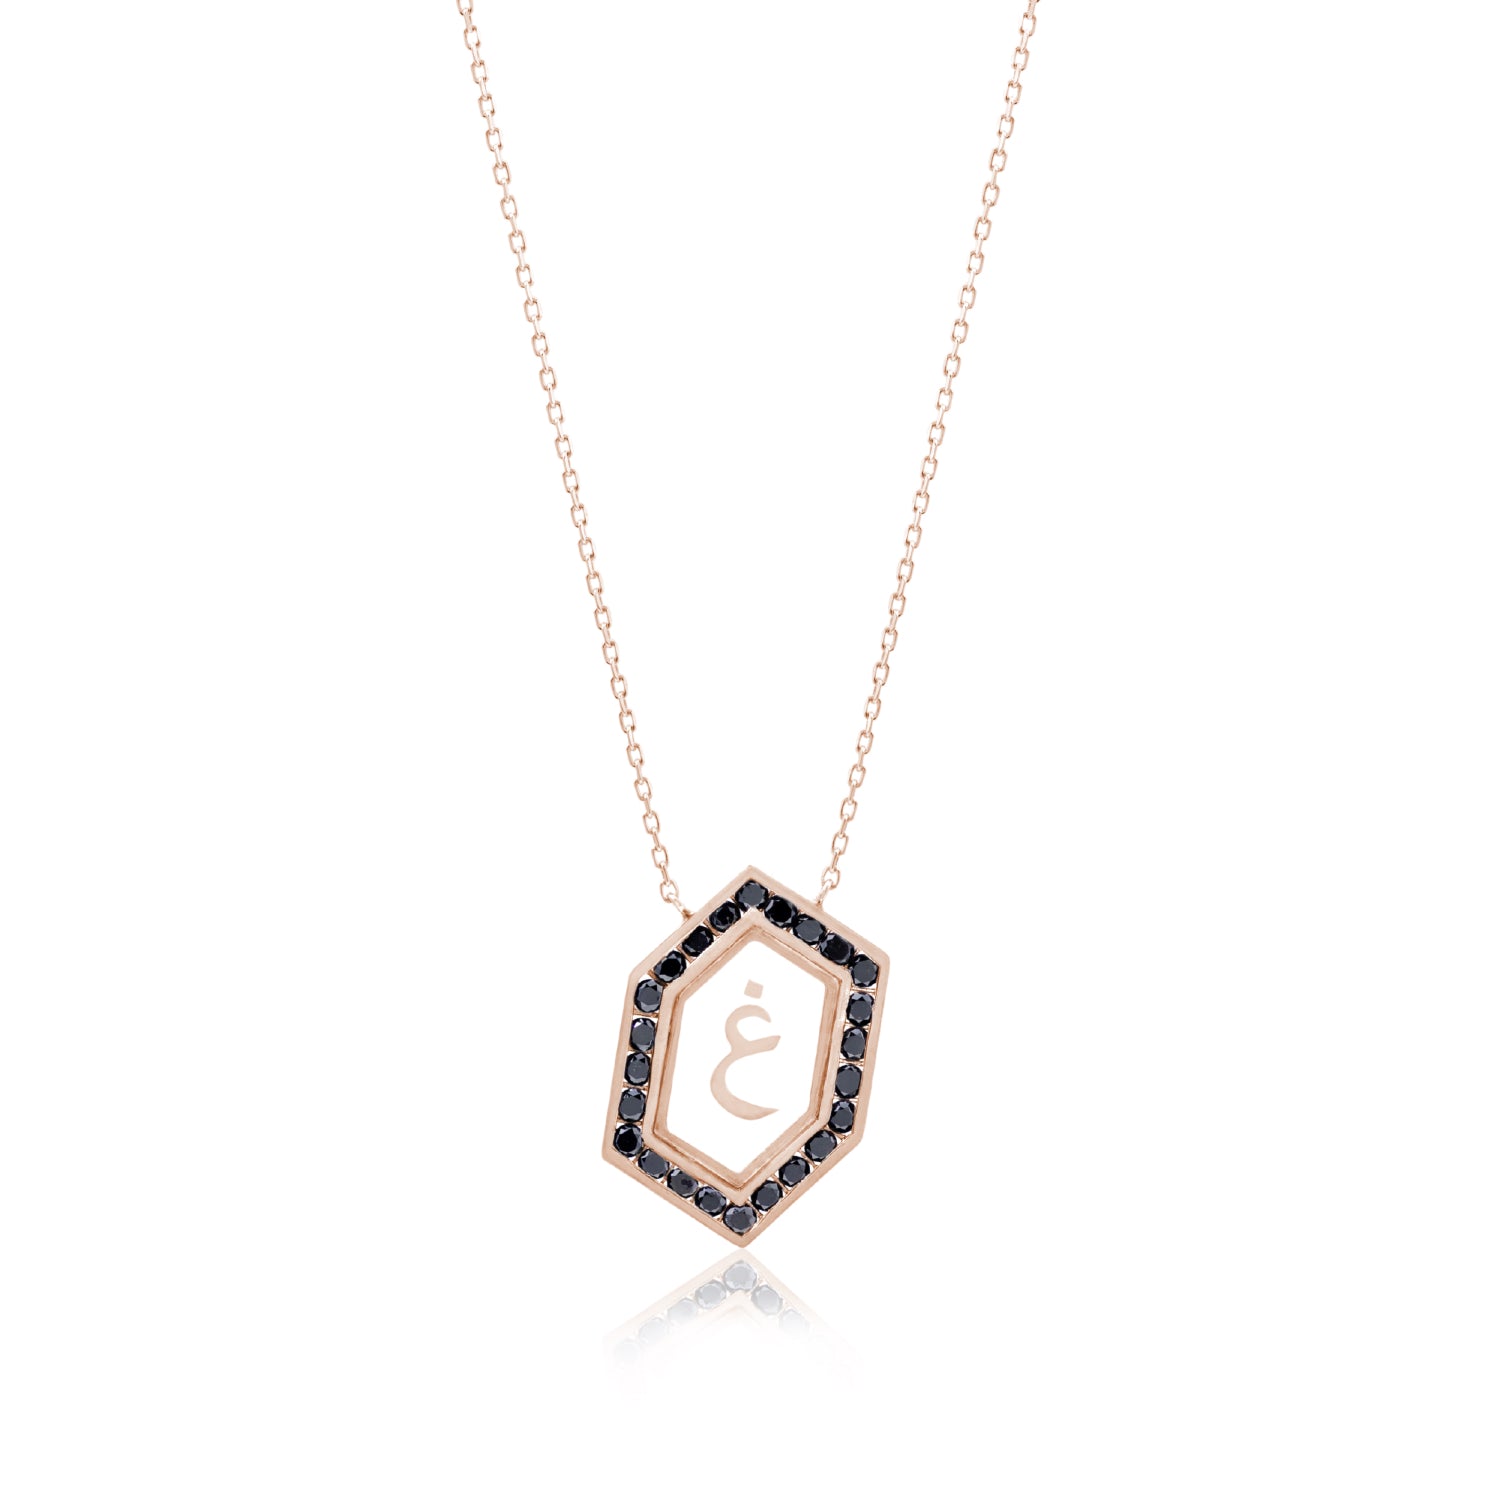 Qamoos 1.0 Letter غ Black Diamond Necklace in Rose Gold